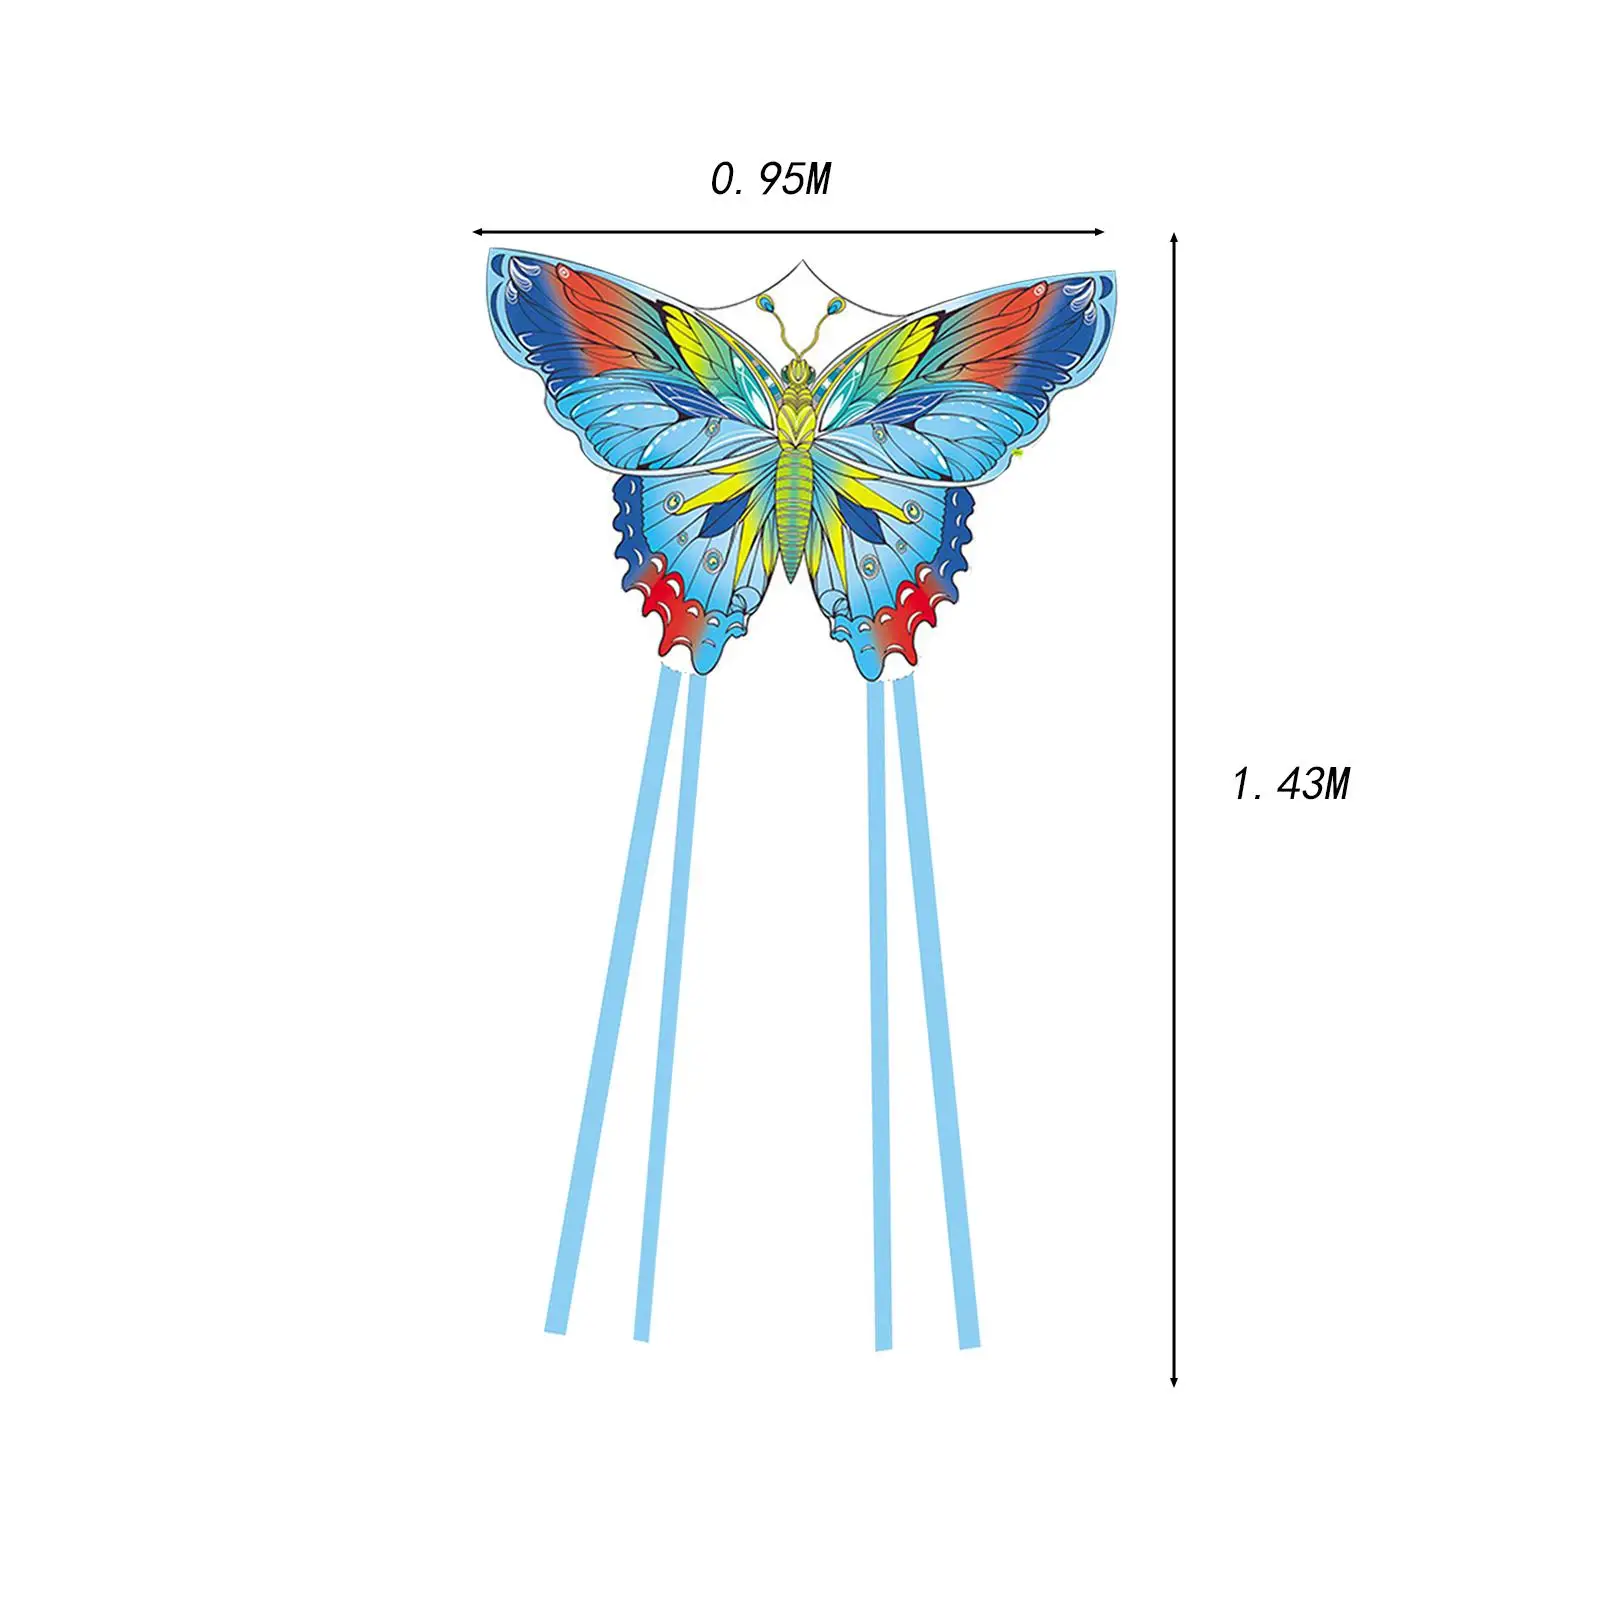 Huge Kite for Adults Kids Durable Eye Catching Butterfly Shape Fabric Kites for Yard Outdoor Activities Gift Family Parties Trip